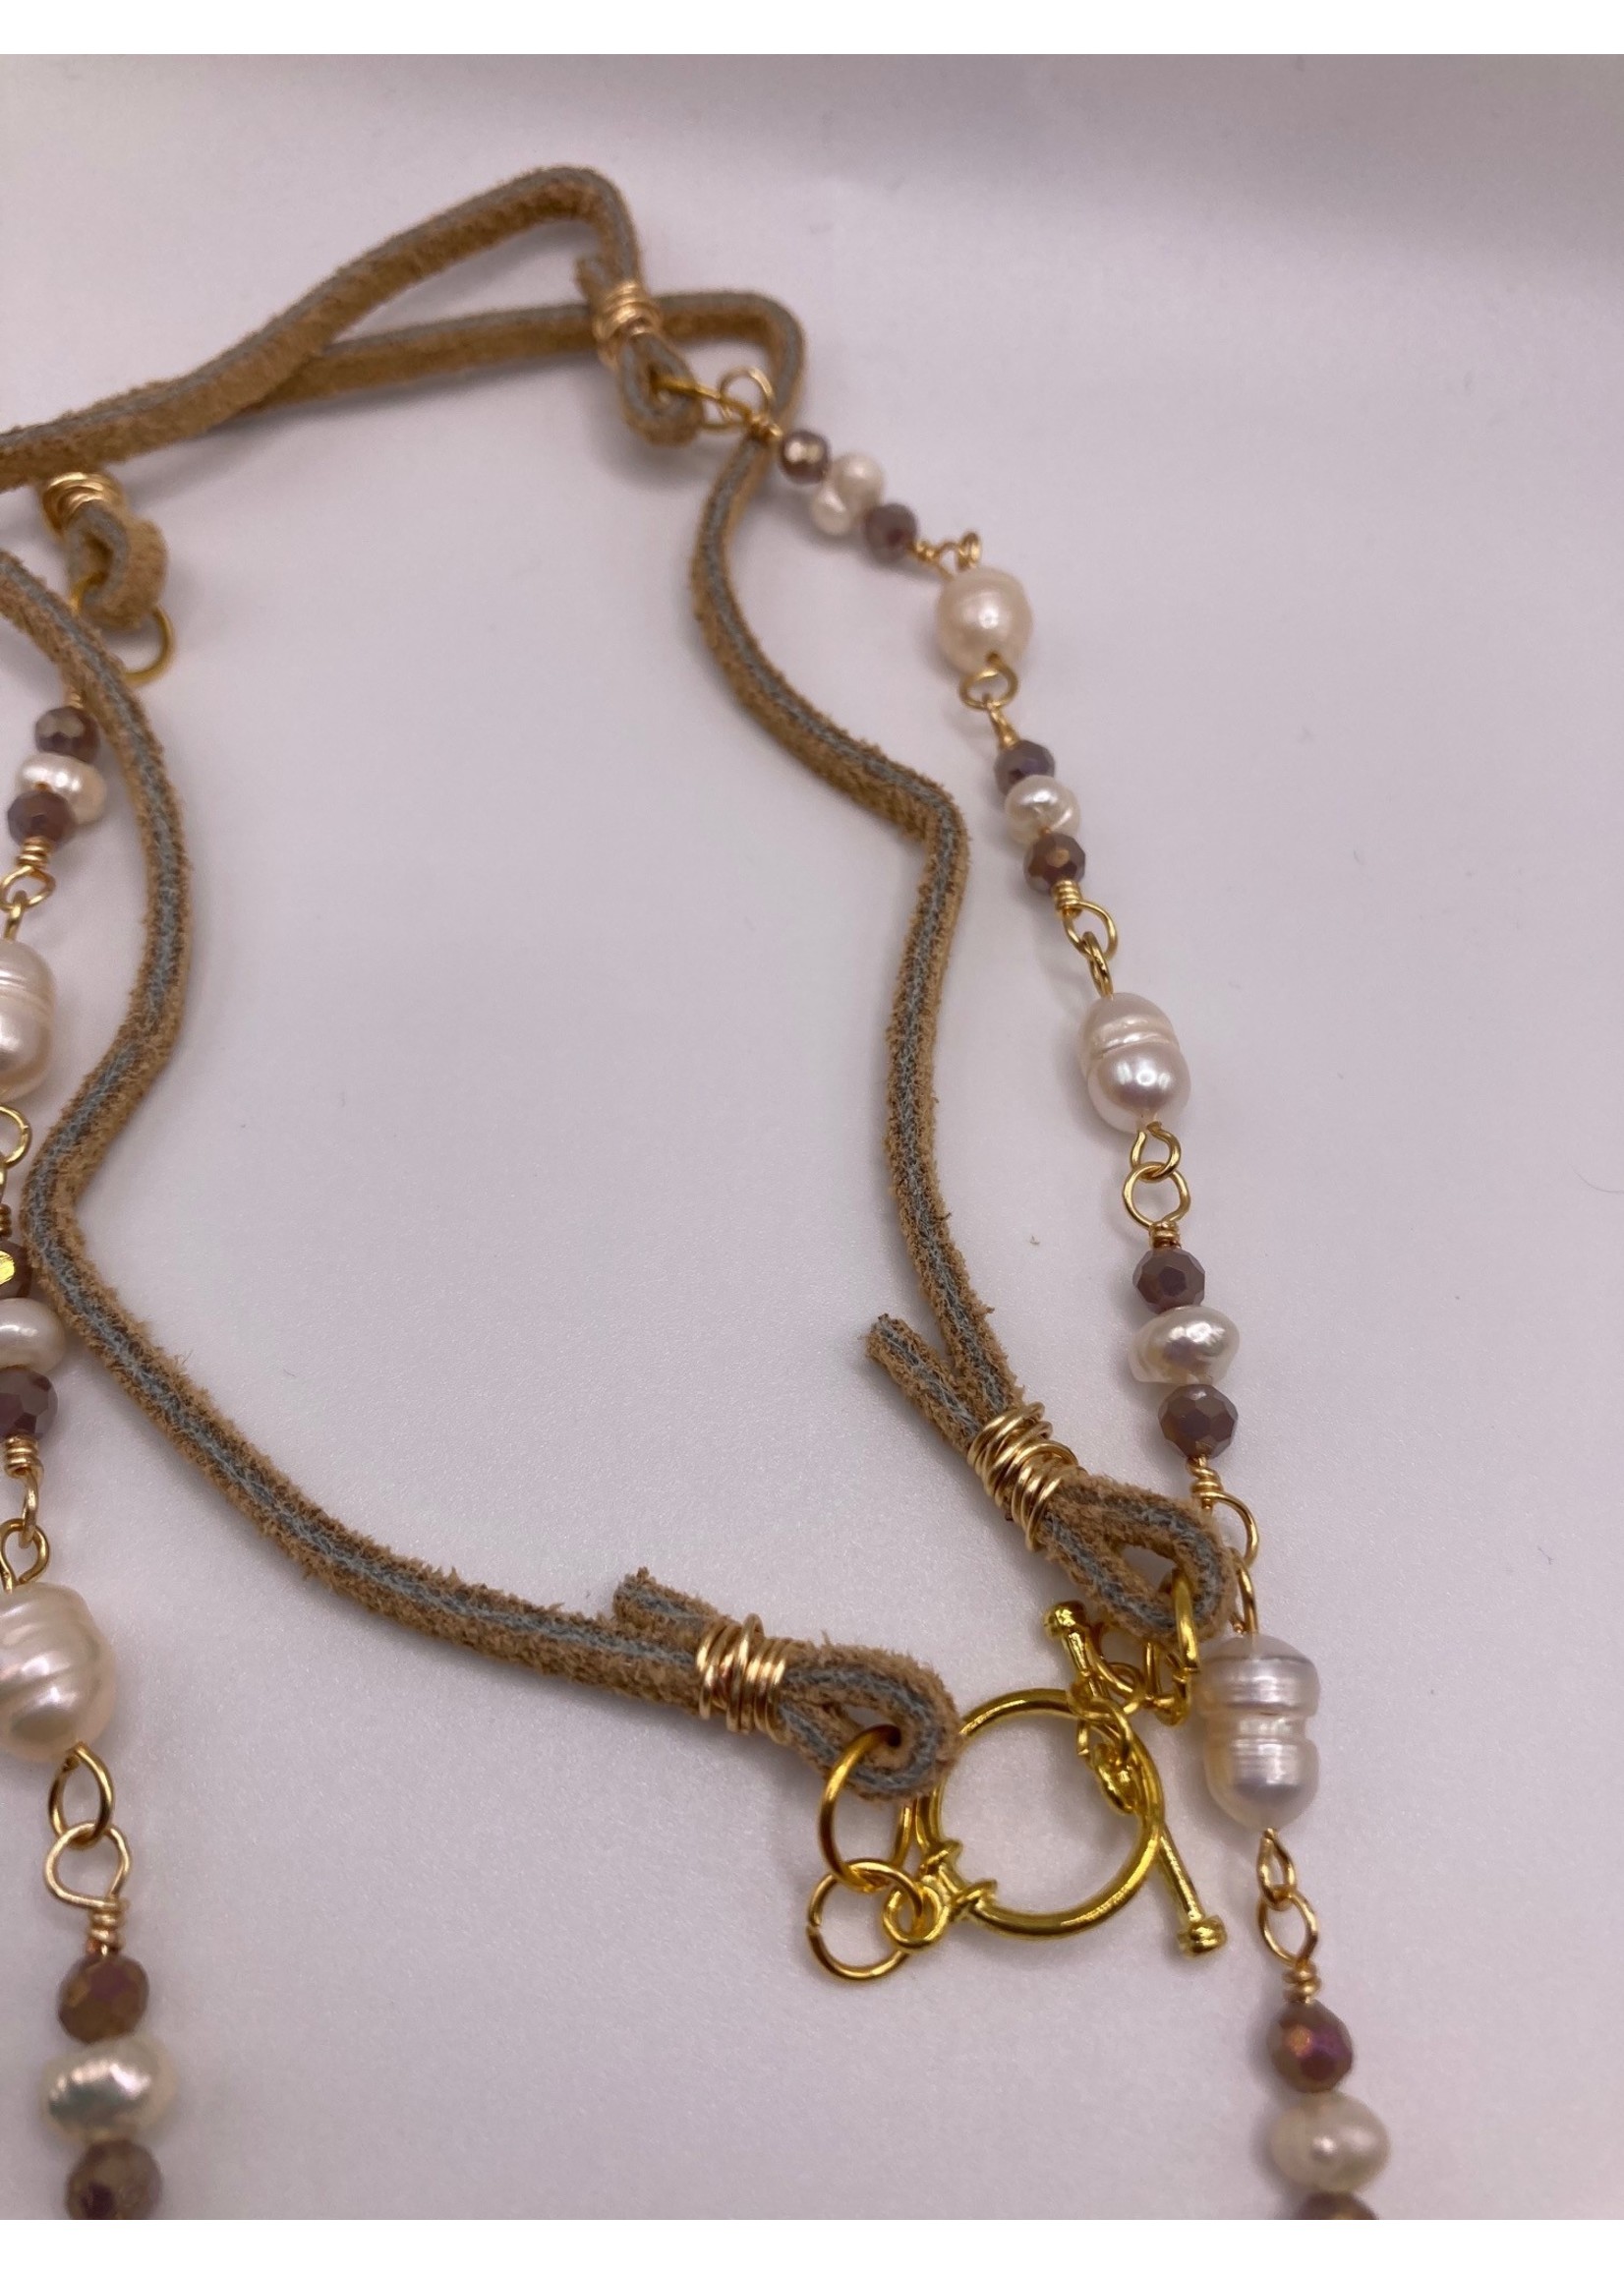 Our Twisted Dahlia N202 Chalcedony Pendant with Freshwater Pearls, Preciosa Crystals, Tan Suede Cording with Gold Wire